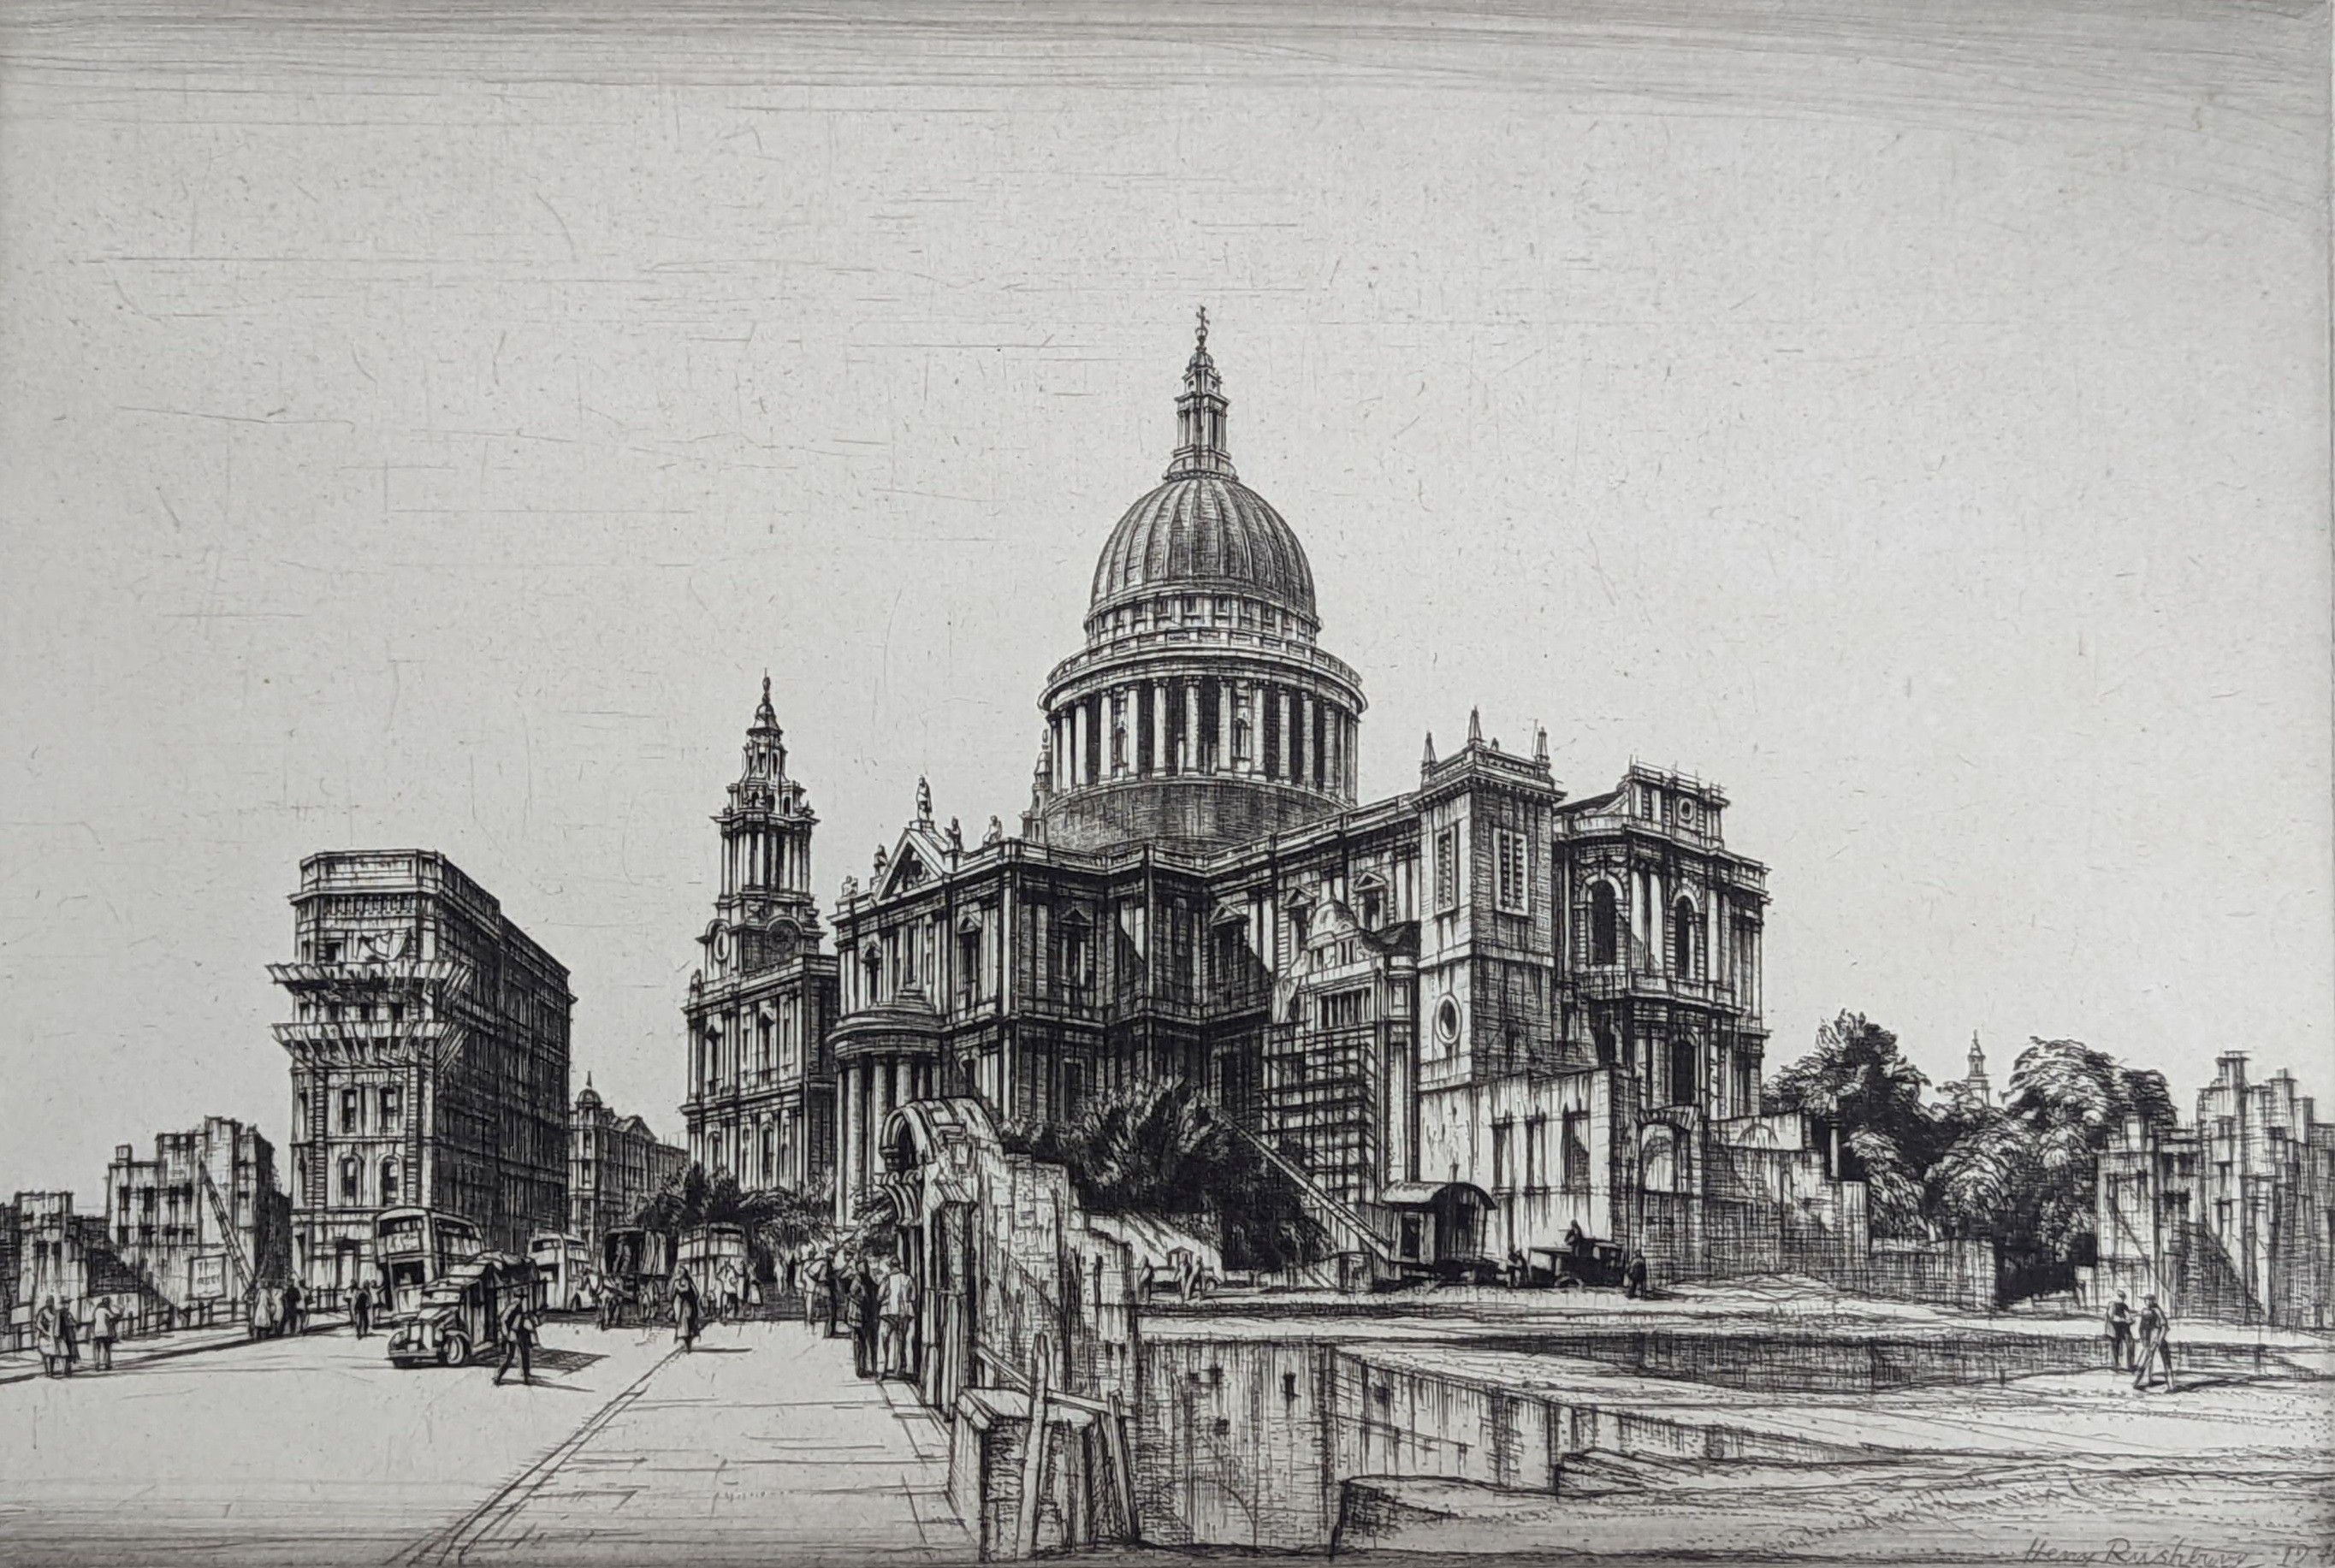 Sir Henry Rushbury RA (1889-1968), dry point etching, View of St Paul's during the Blitz, signed in pencil and dated 1942 in the plate, 25 x 37cm, unframed